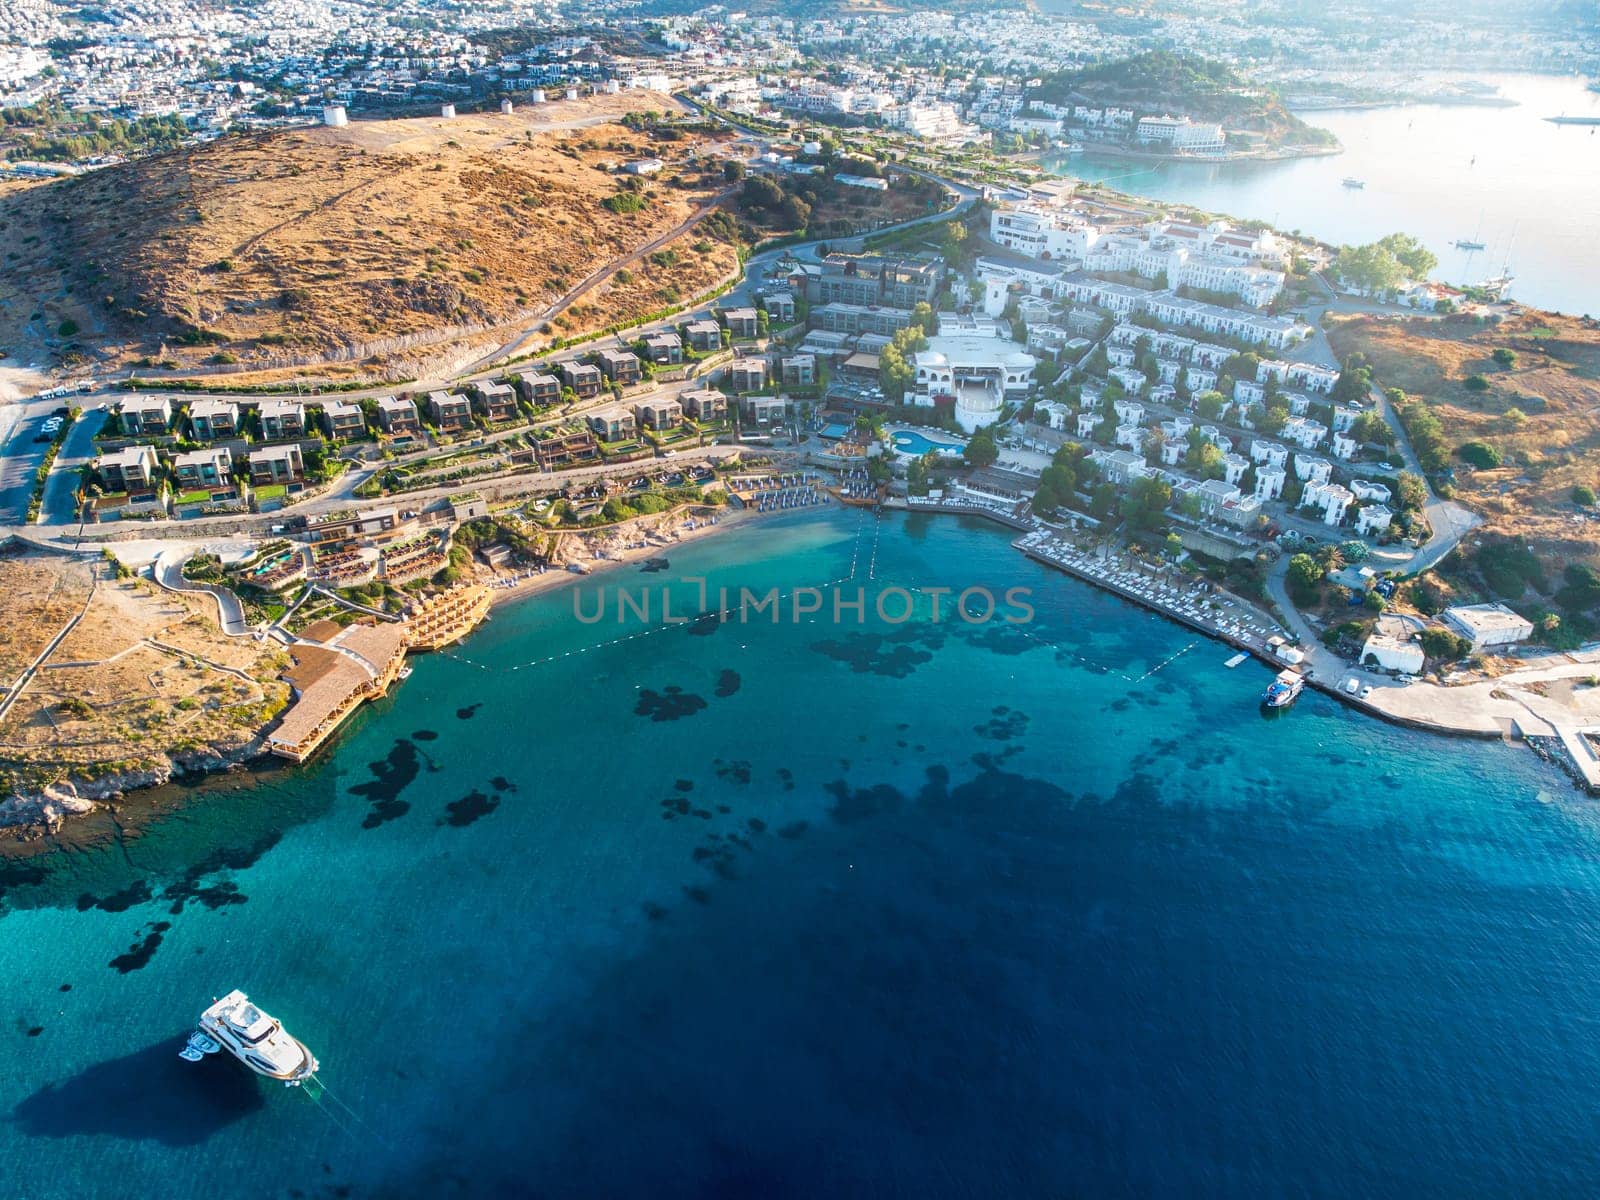 Aerial view of resort villa layout on the hill, yacht in the sea lagoon, beach surrounded by turquoise sea and hills. Beautiful beach from top. Aegean sea in Turkey. Aerial beautiful coast landscape by igor010